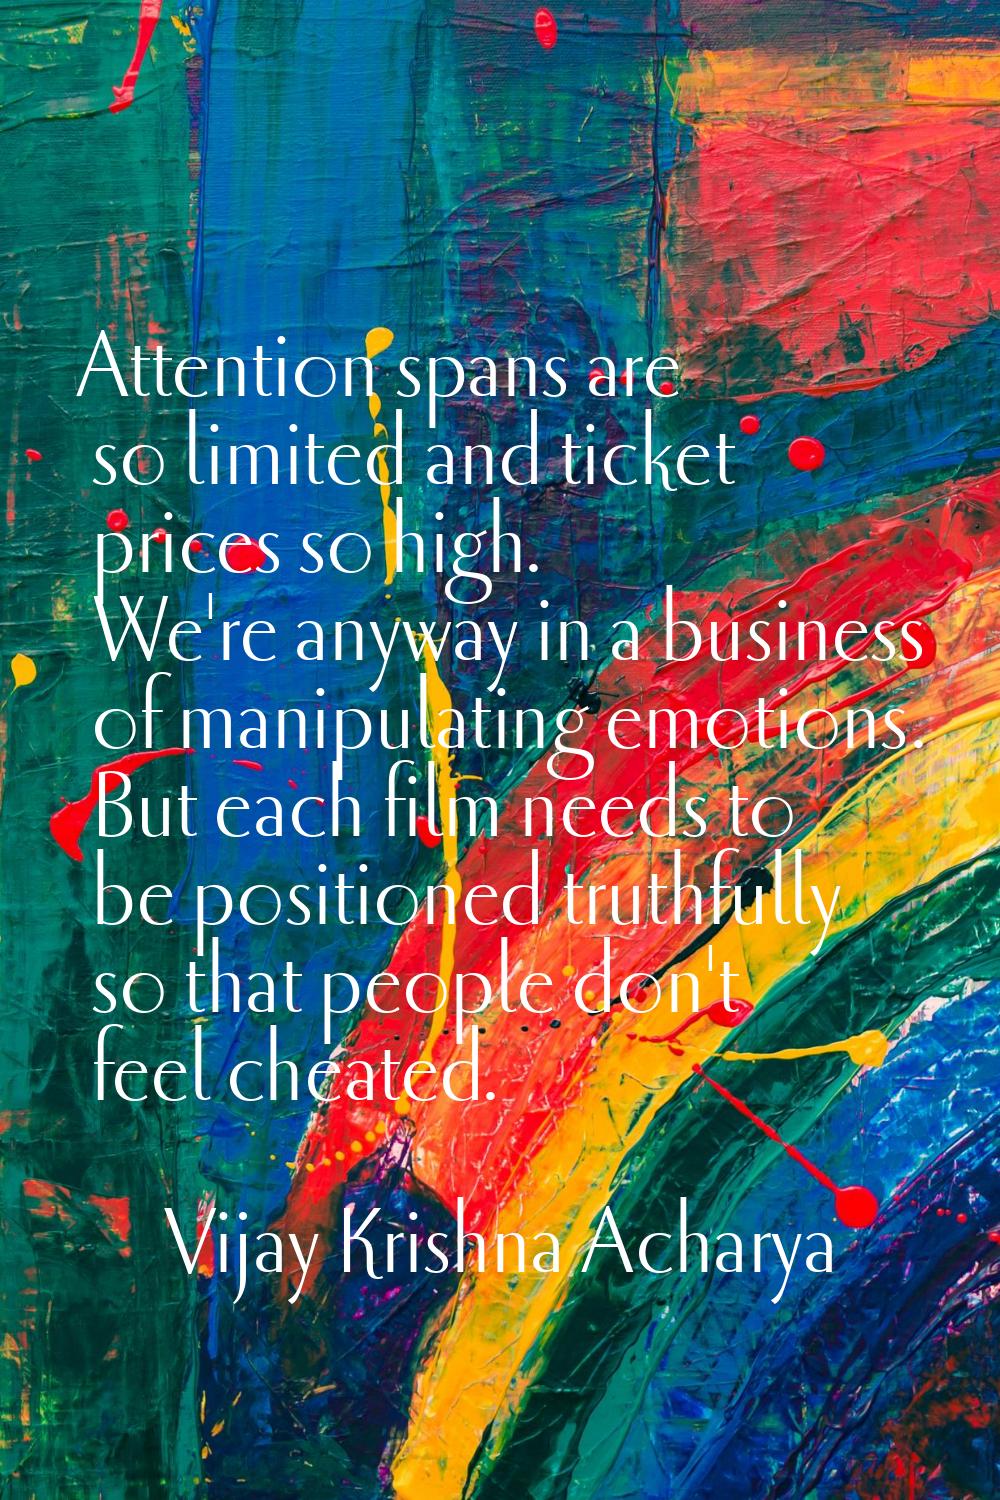 Attention spans are so limited and ticket prices so high. We're anyway in a business of manipulatin